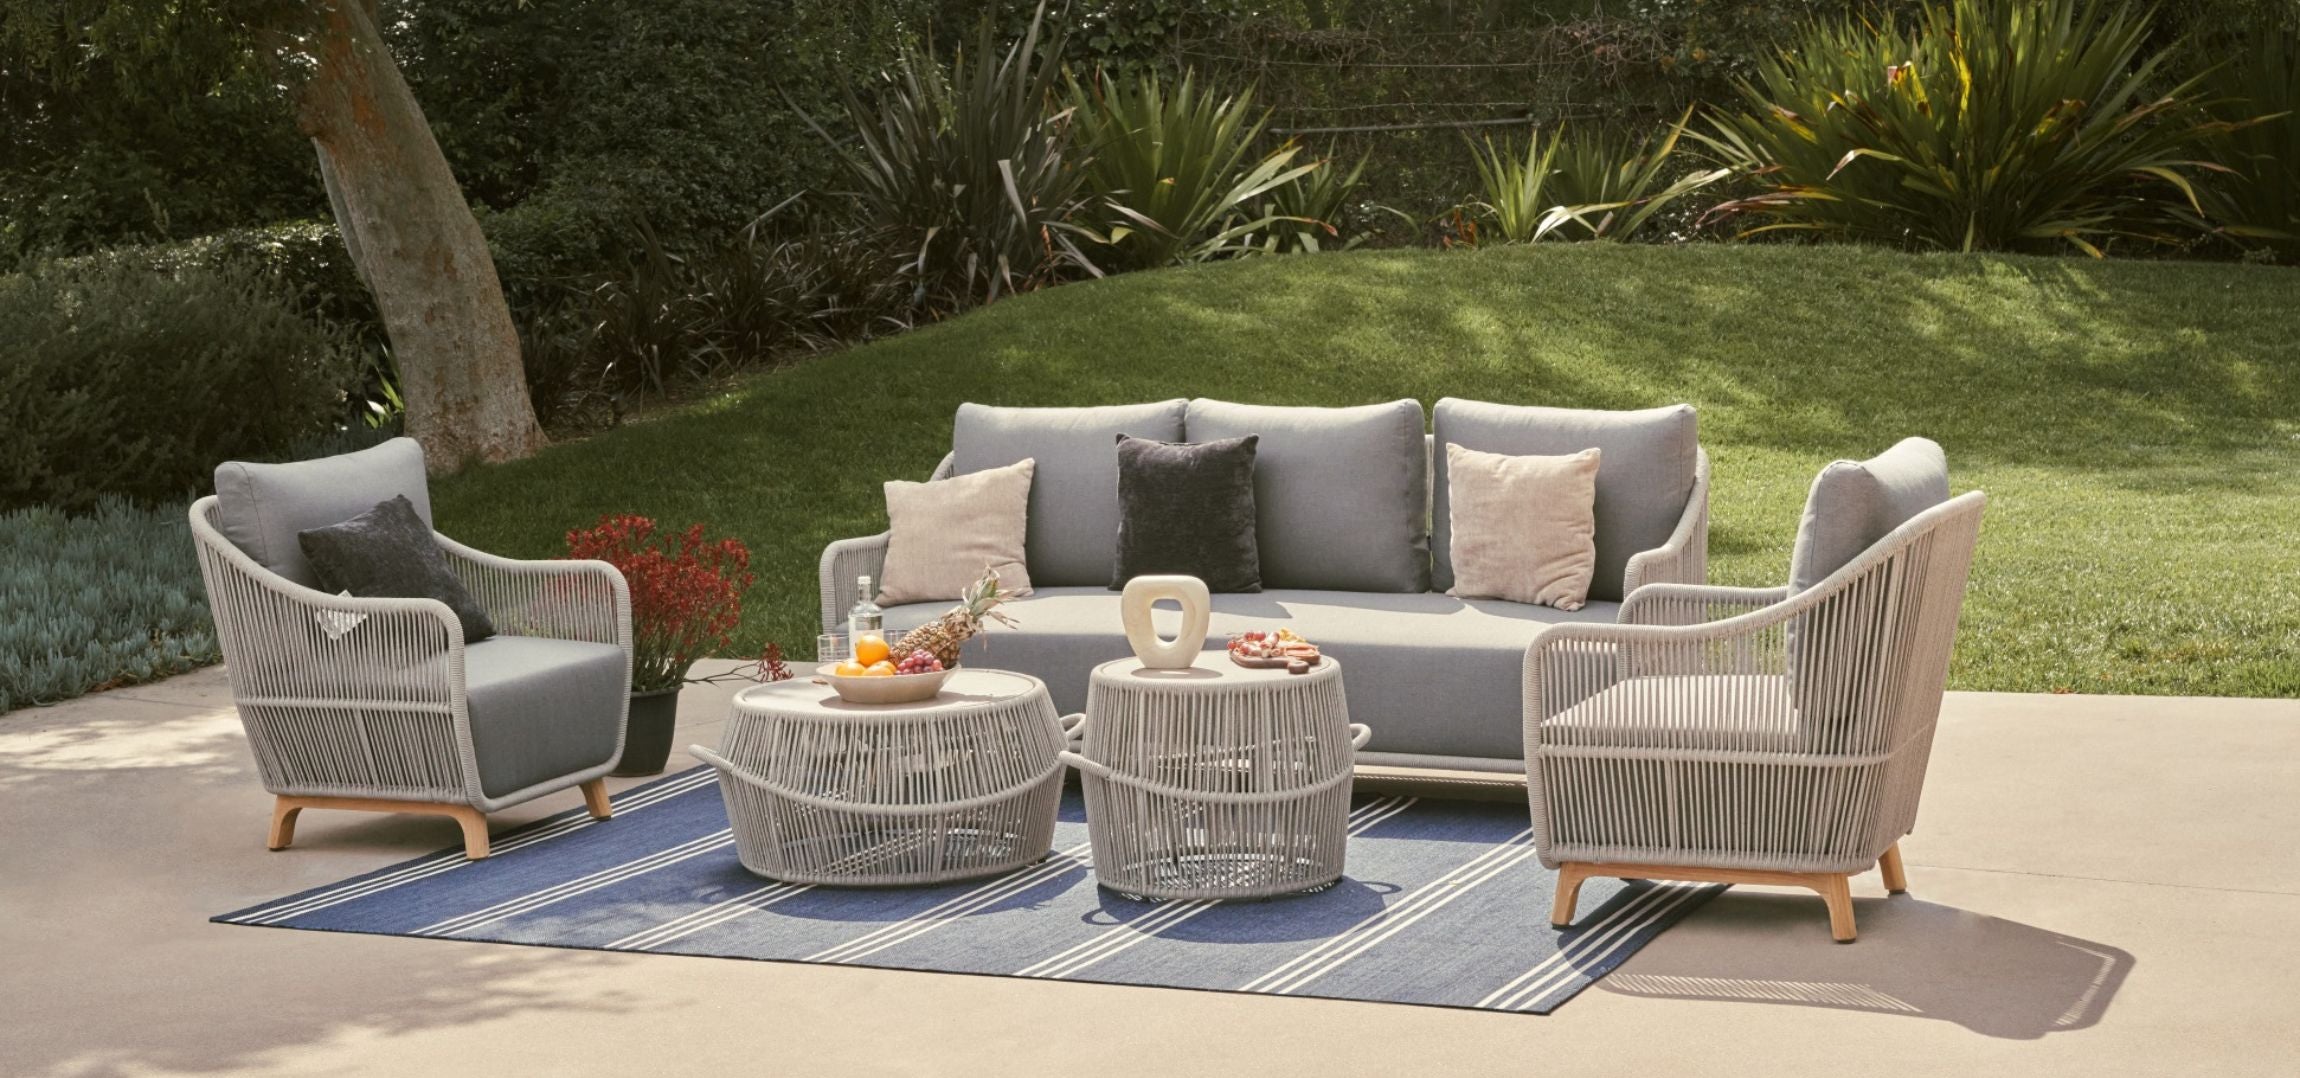 How To Protect Wooden Outdoor Furniture